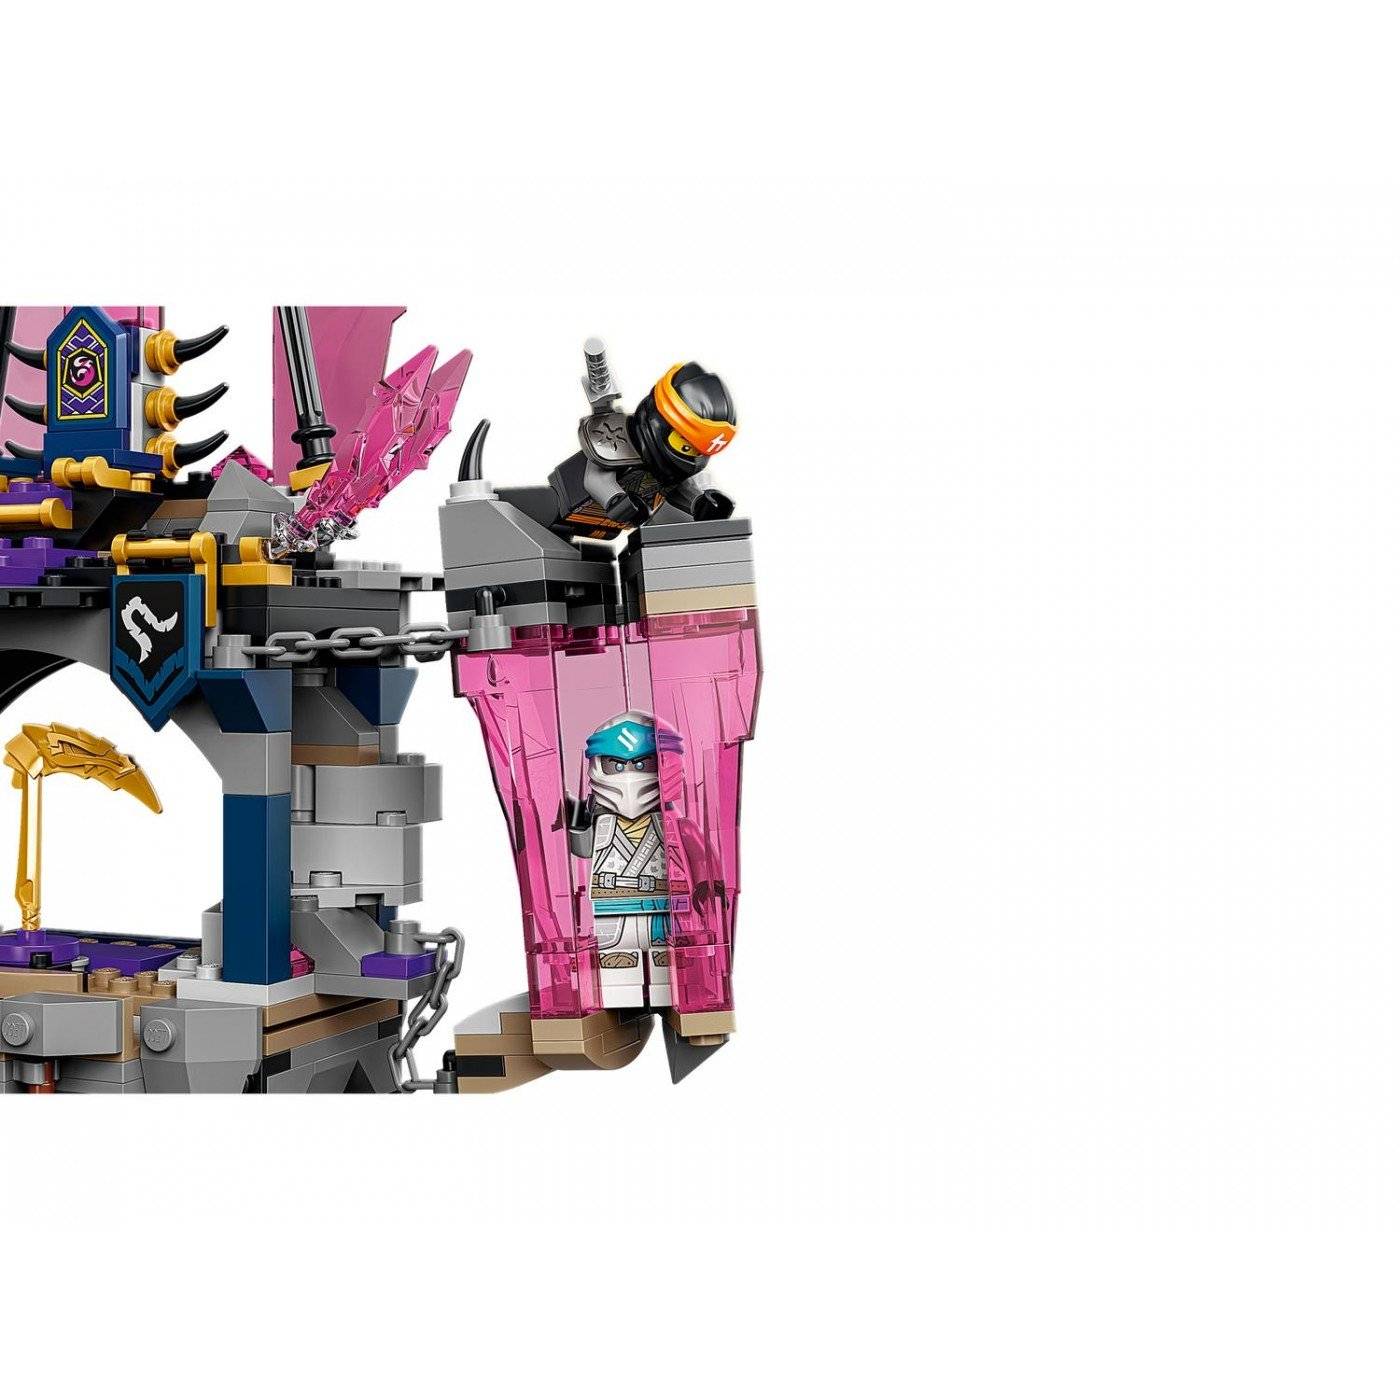 LEGO 71771 THE CRYSTAL KING TEMPLE